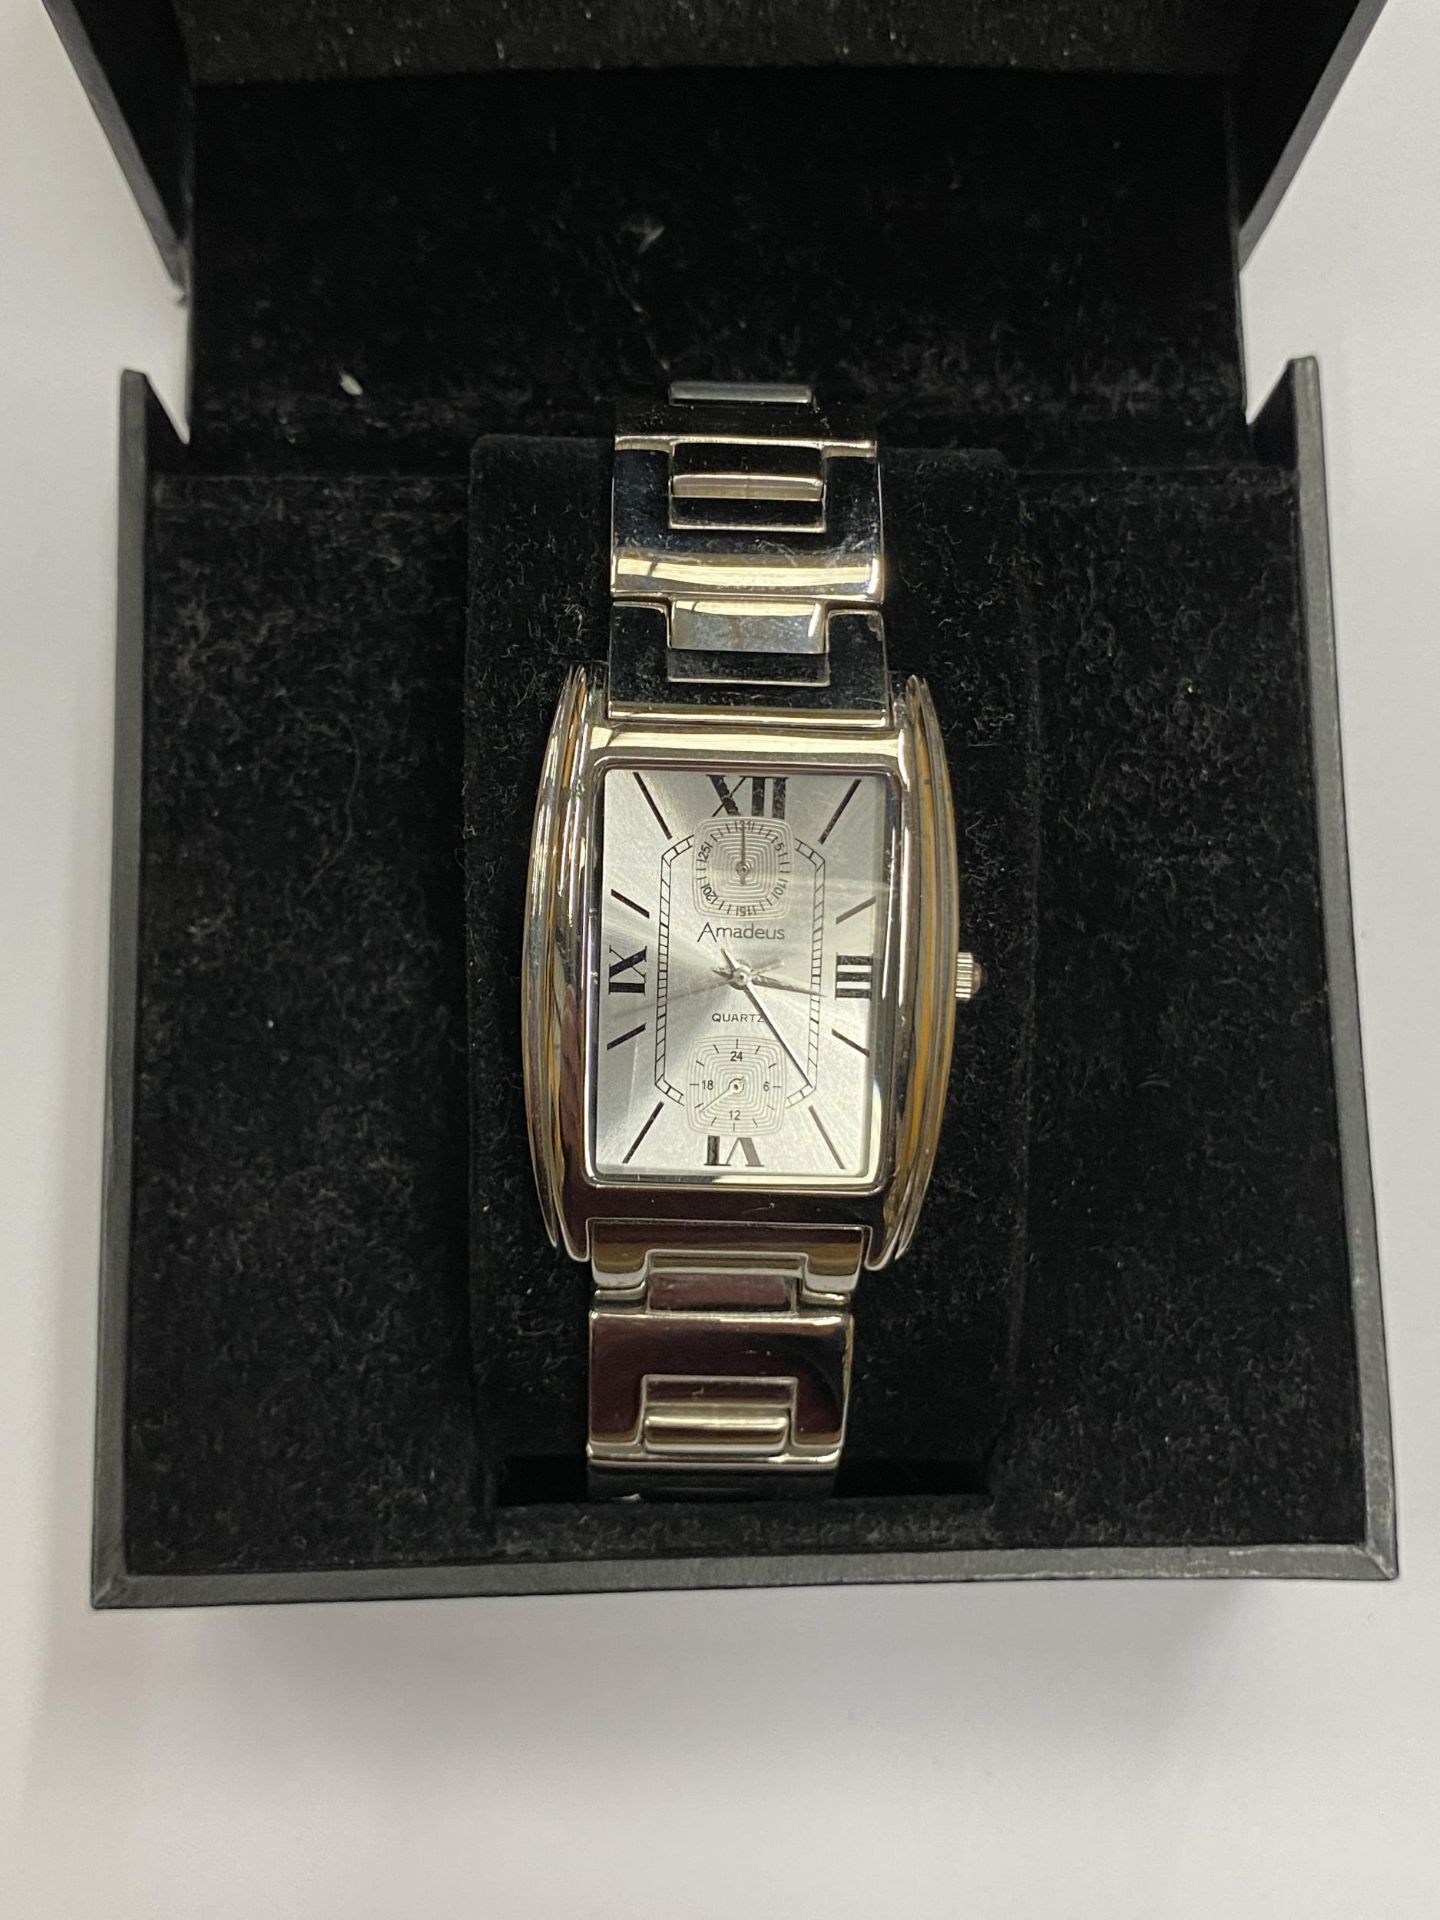 A BOXED GENTS AMADEUS TANK STYLE WATCH, WORKING WHEN CATALOGUED BUT NO WARRANTIES GIVEN